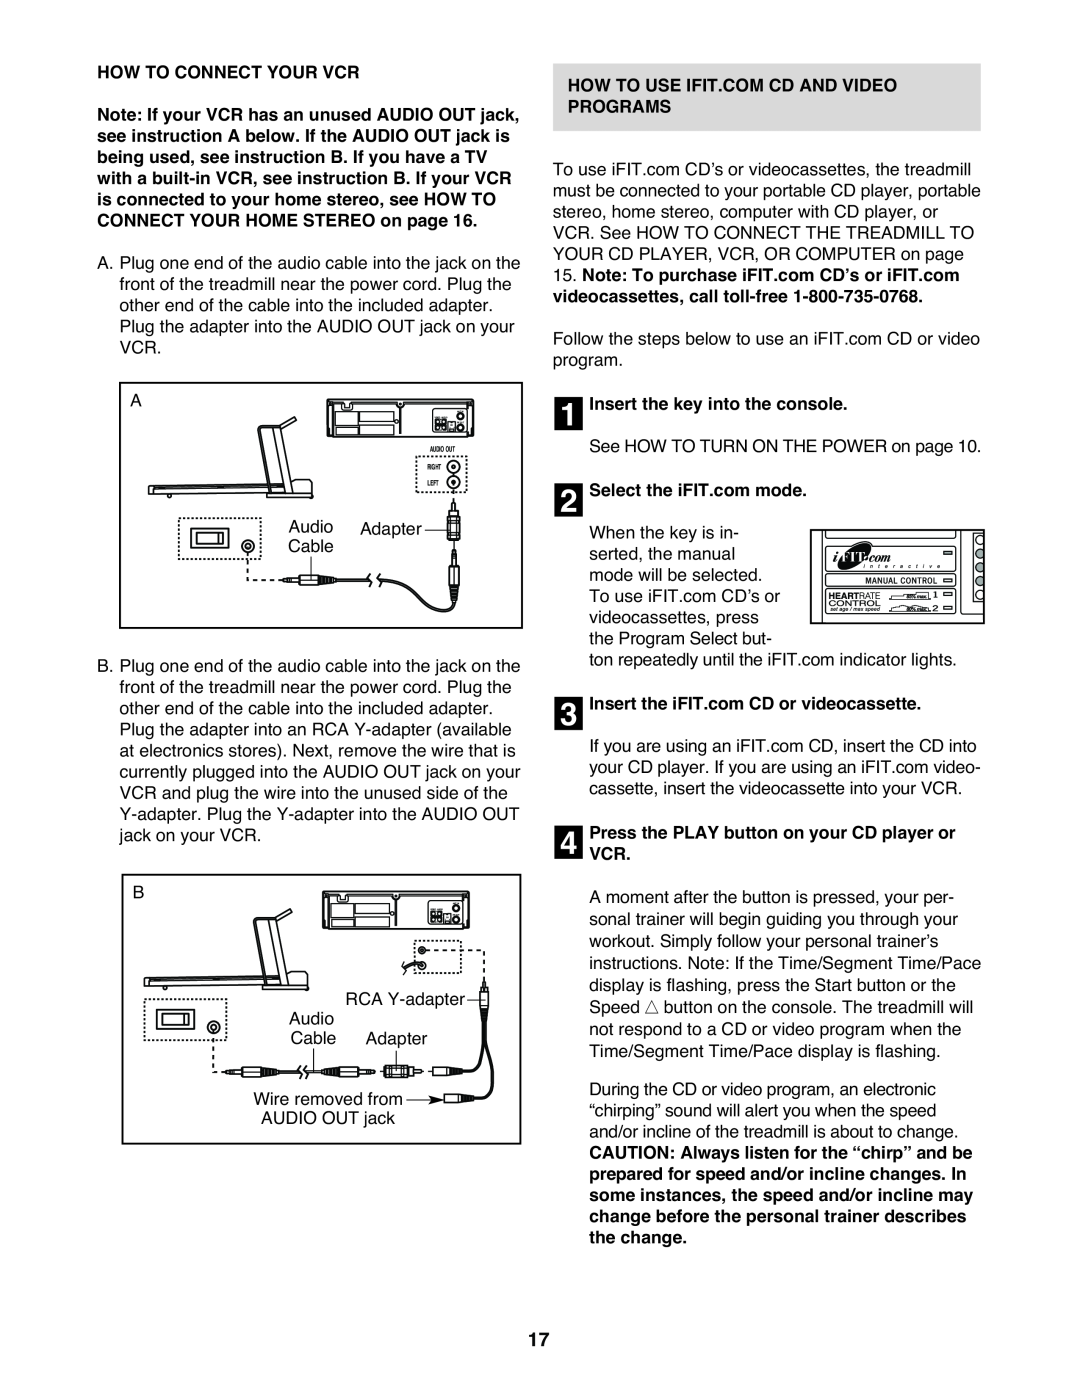 Healthrider HRT12920 manual How To Connect Your Vcr, Insert the key into the console, Select the iFIT.com mode 